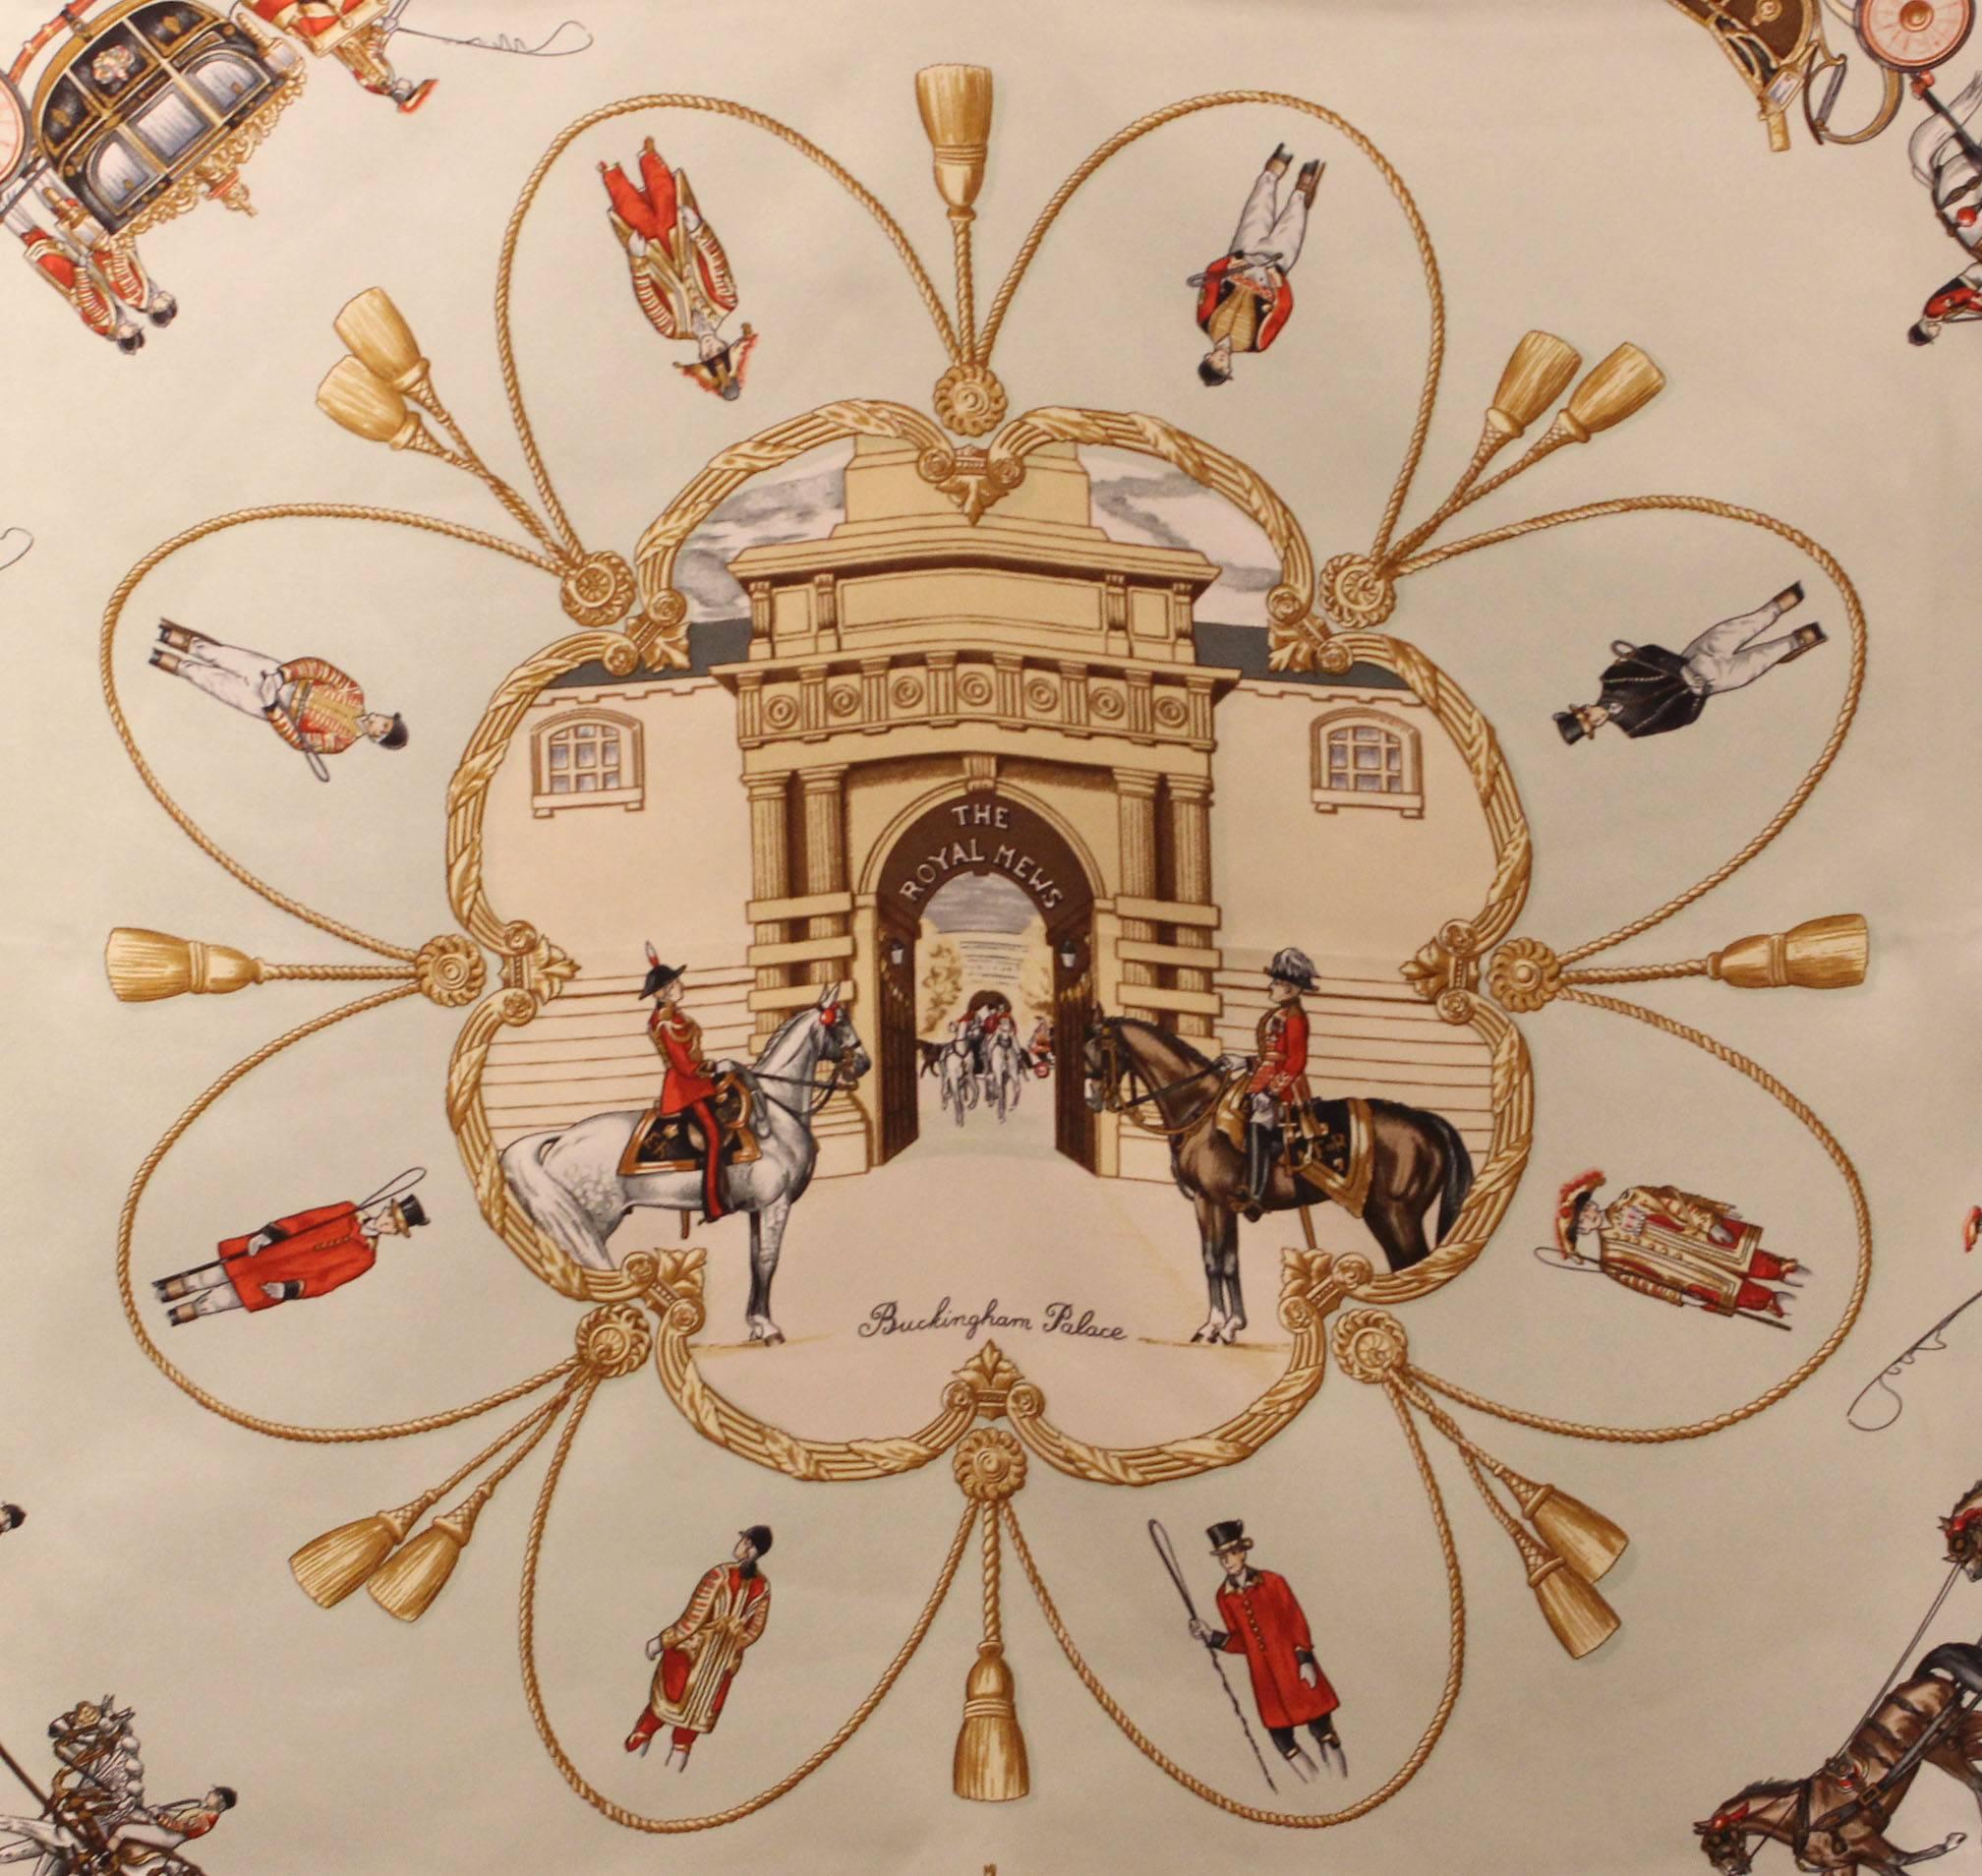 20% OFF!  Holiday Sale! Originally $495
This Hermes scarf was designed by Jean De Fougerolle in the early 1990's. His signature is marked in the lower right, opposite the Hermes Paris mark. The center illustrates the "Royal Mews"